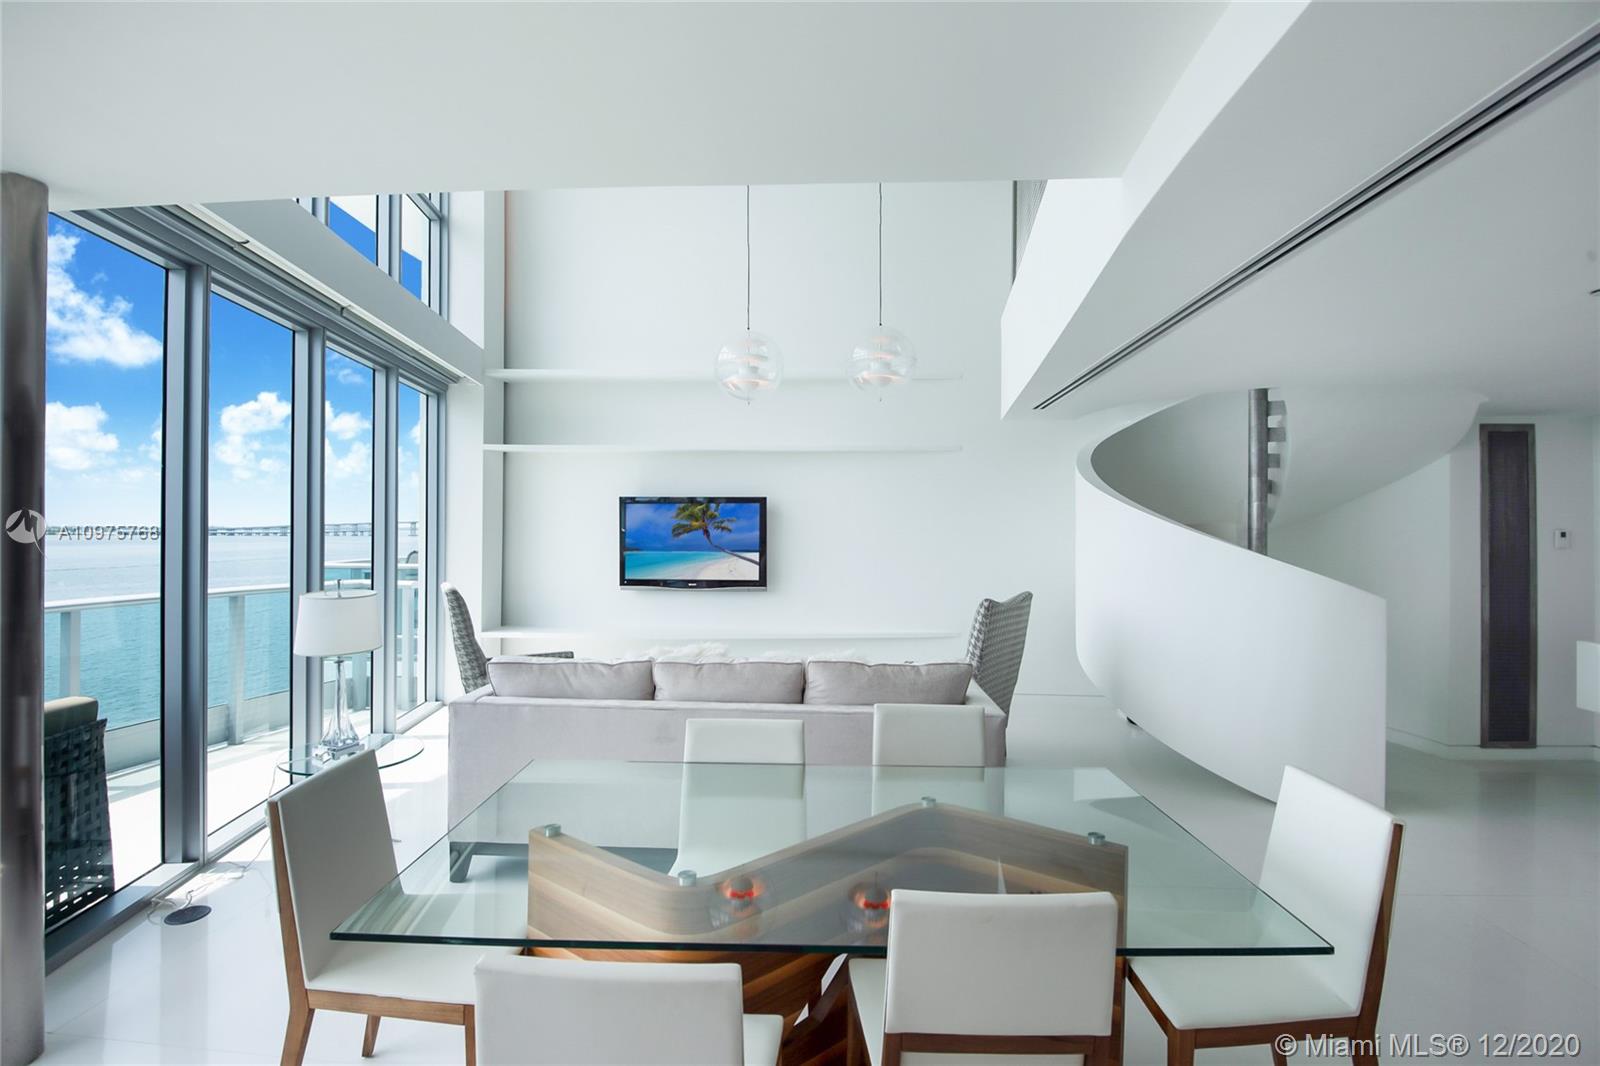 Clean lines, open spaces, and breathtaking views from Bay Loft 46.